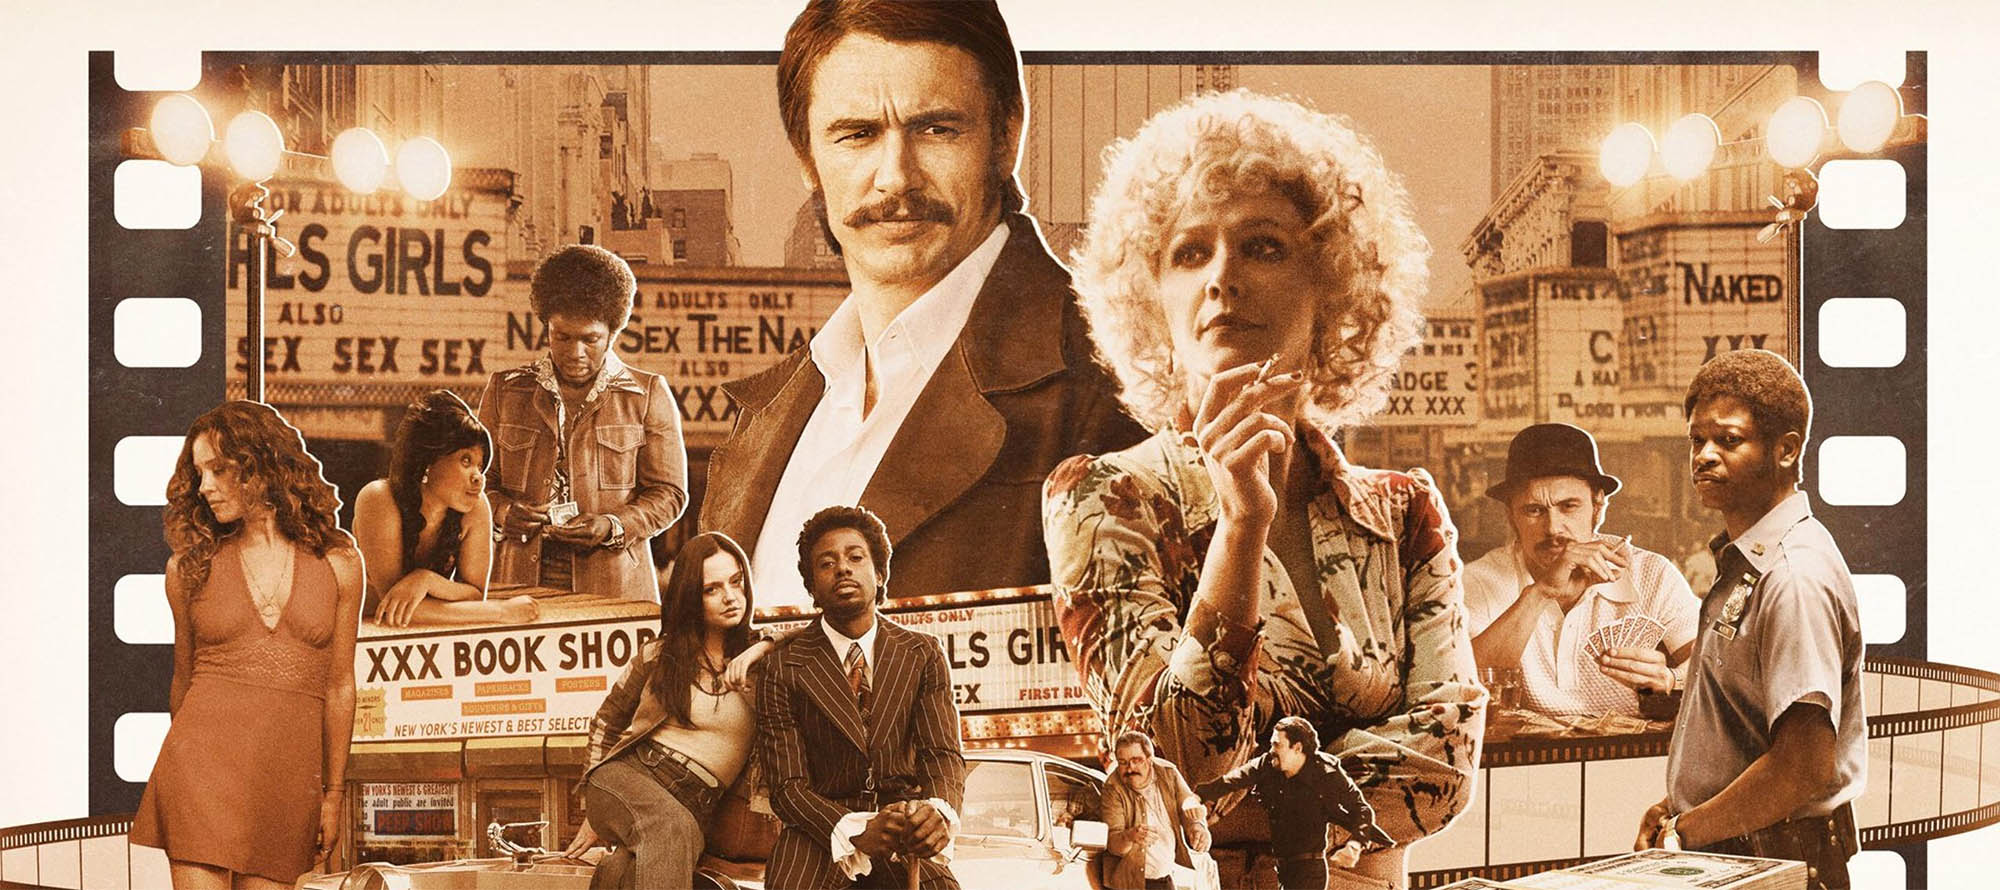 Along with the news that HBO has shared the premiere date for season two of 'The Deuce', we’re taking a look at some of the other shows the cable giant has lined up for this year and the next.